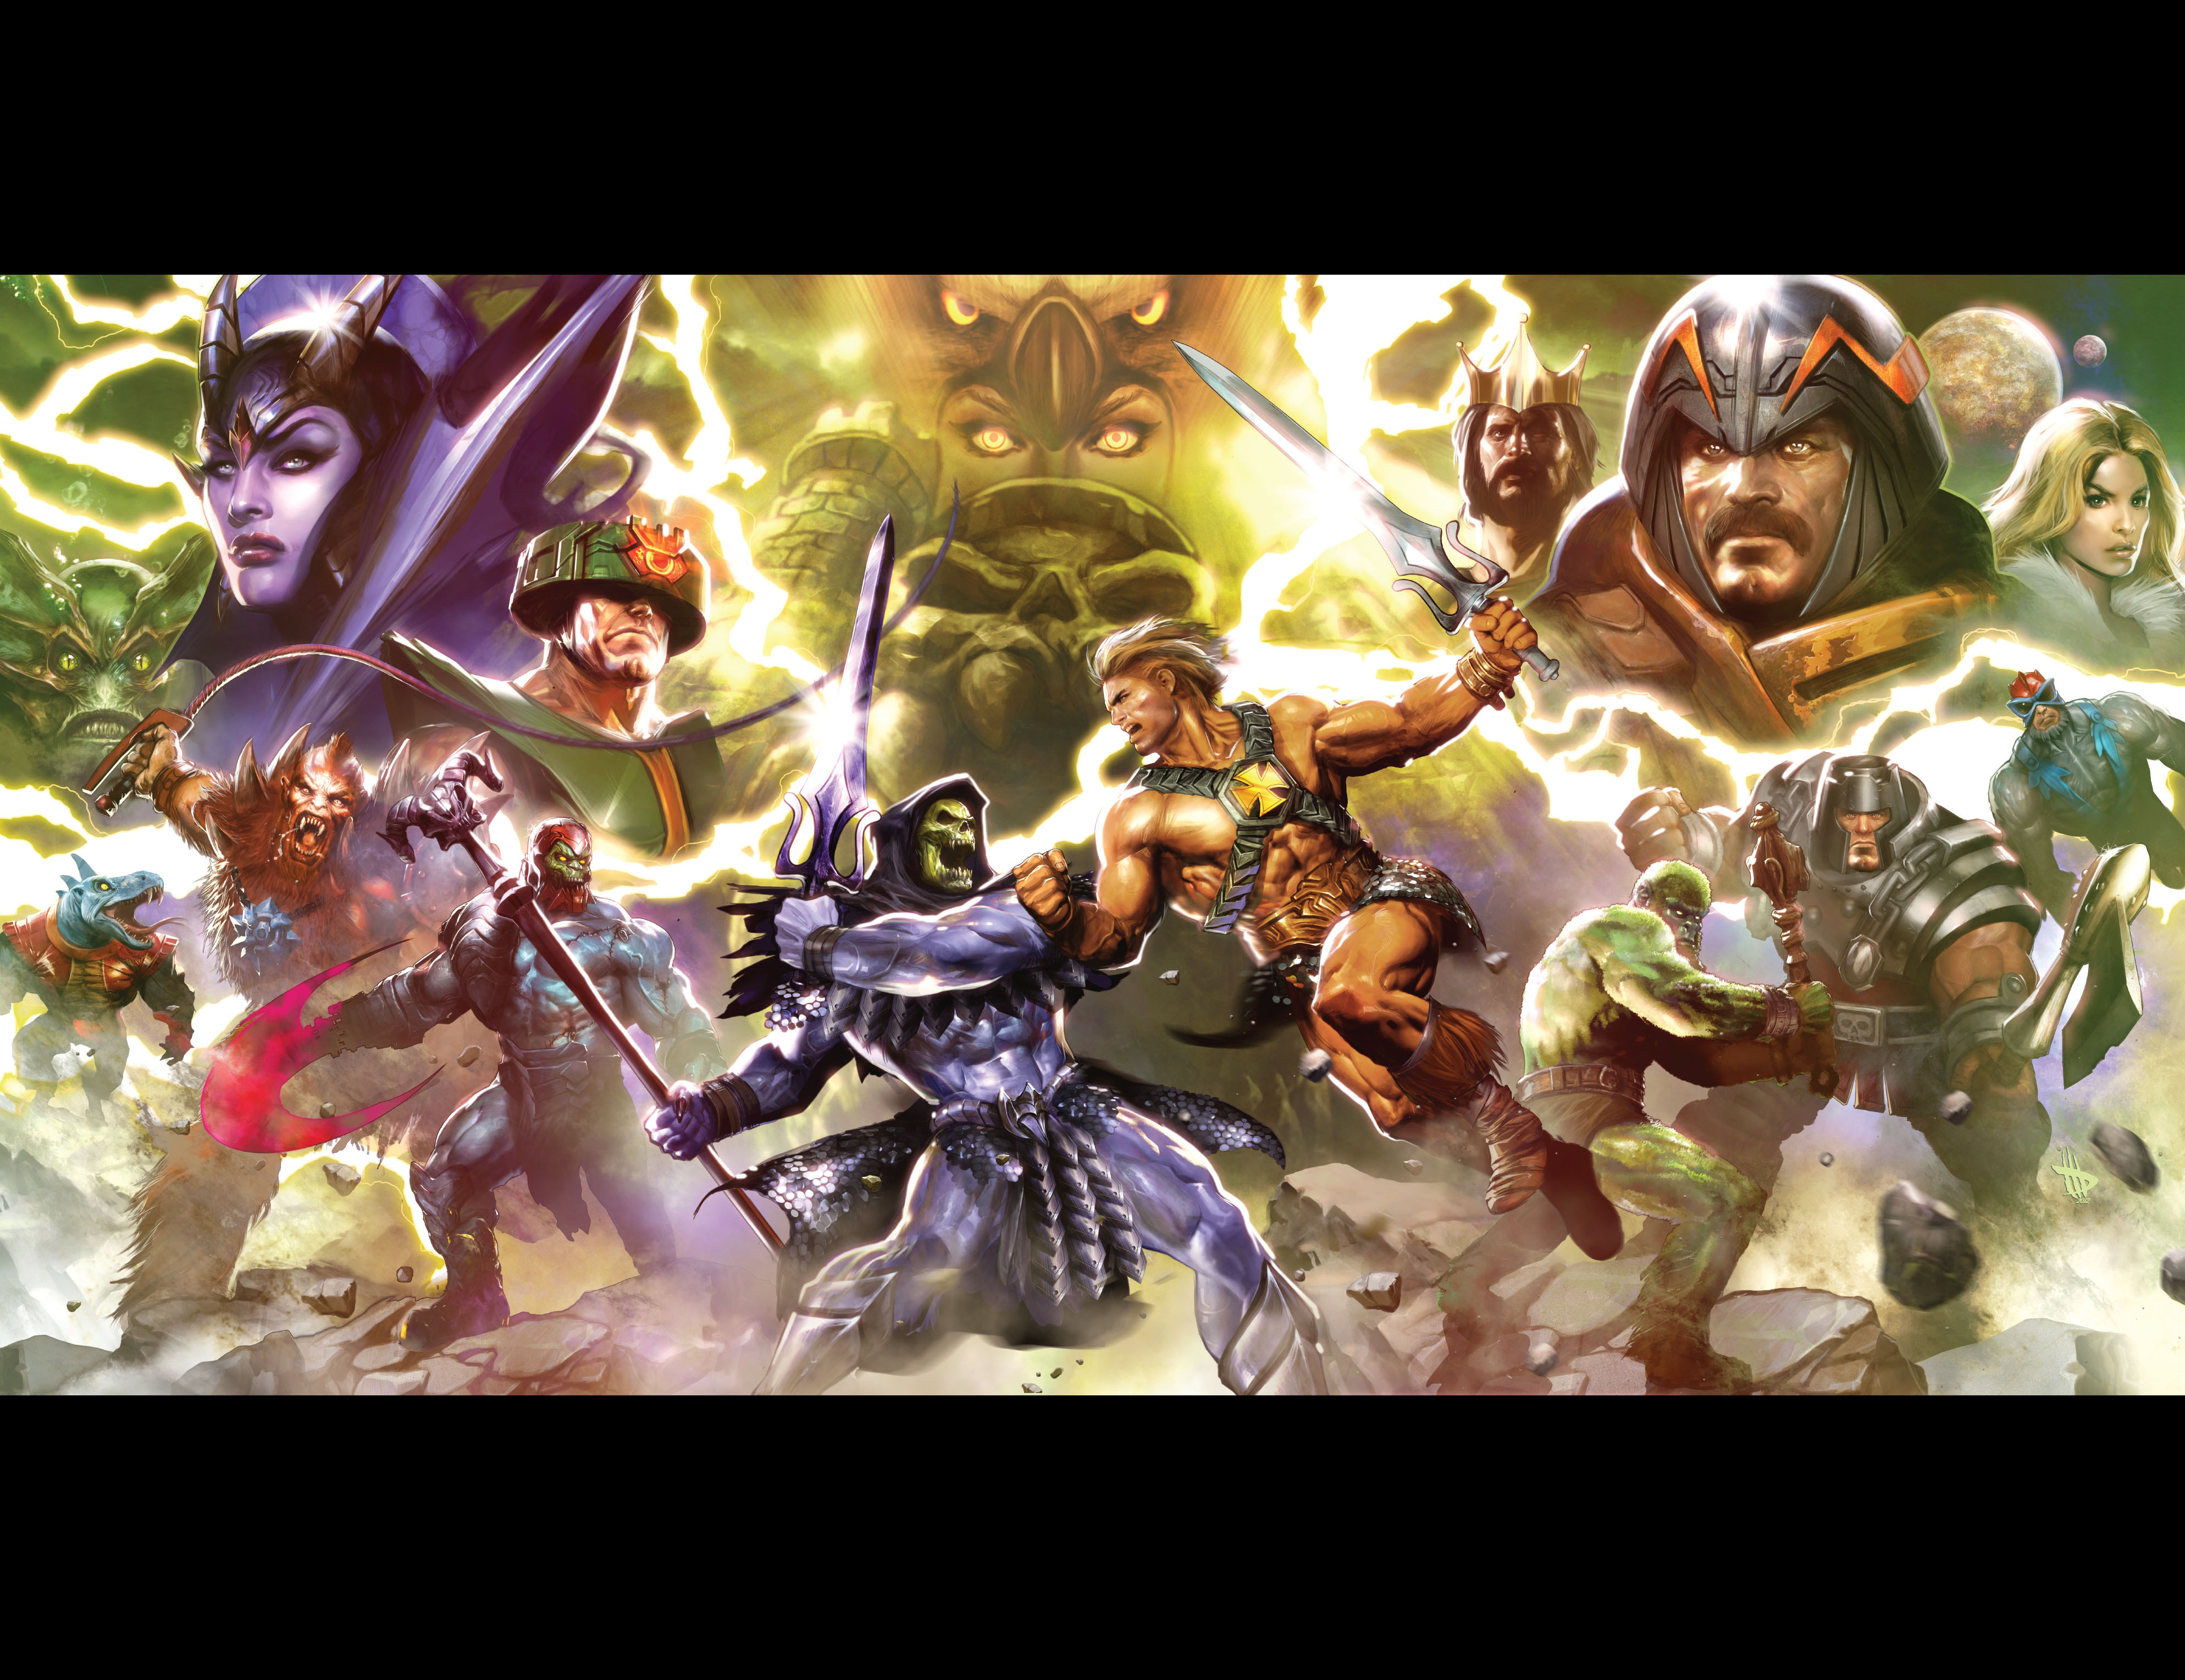 He man wallpapers Group 75